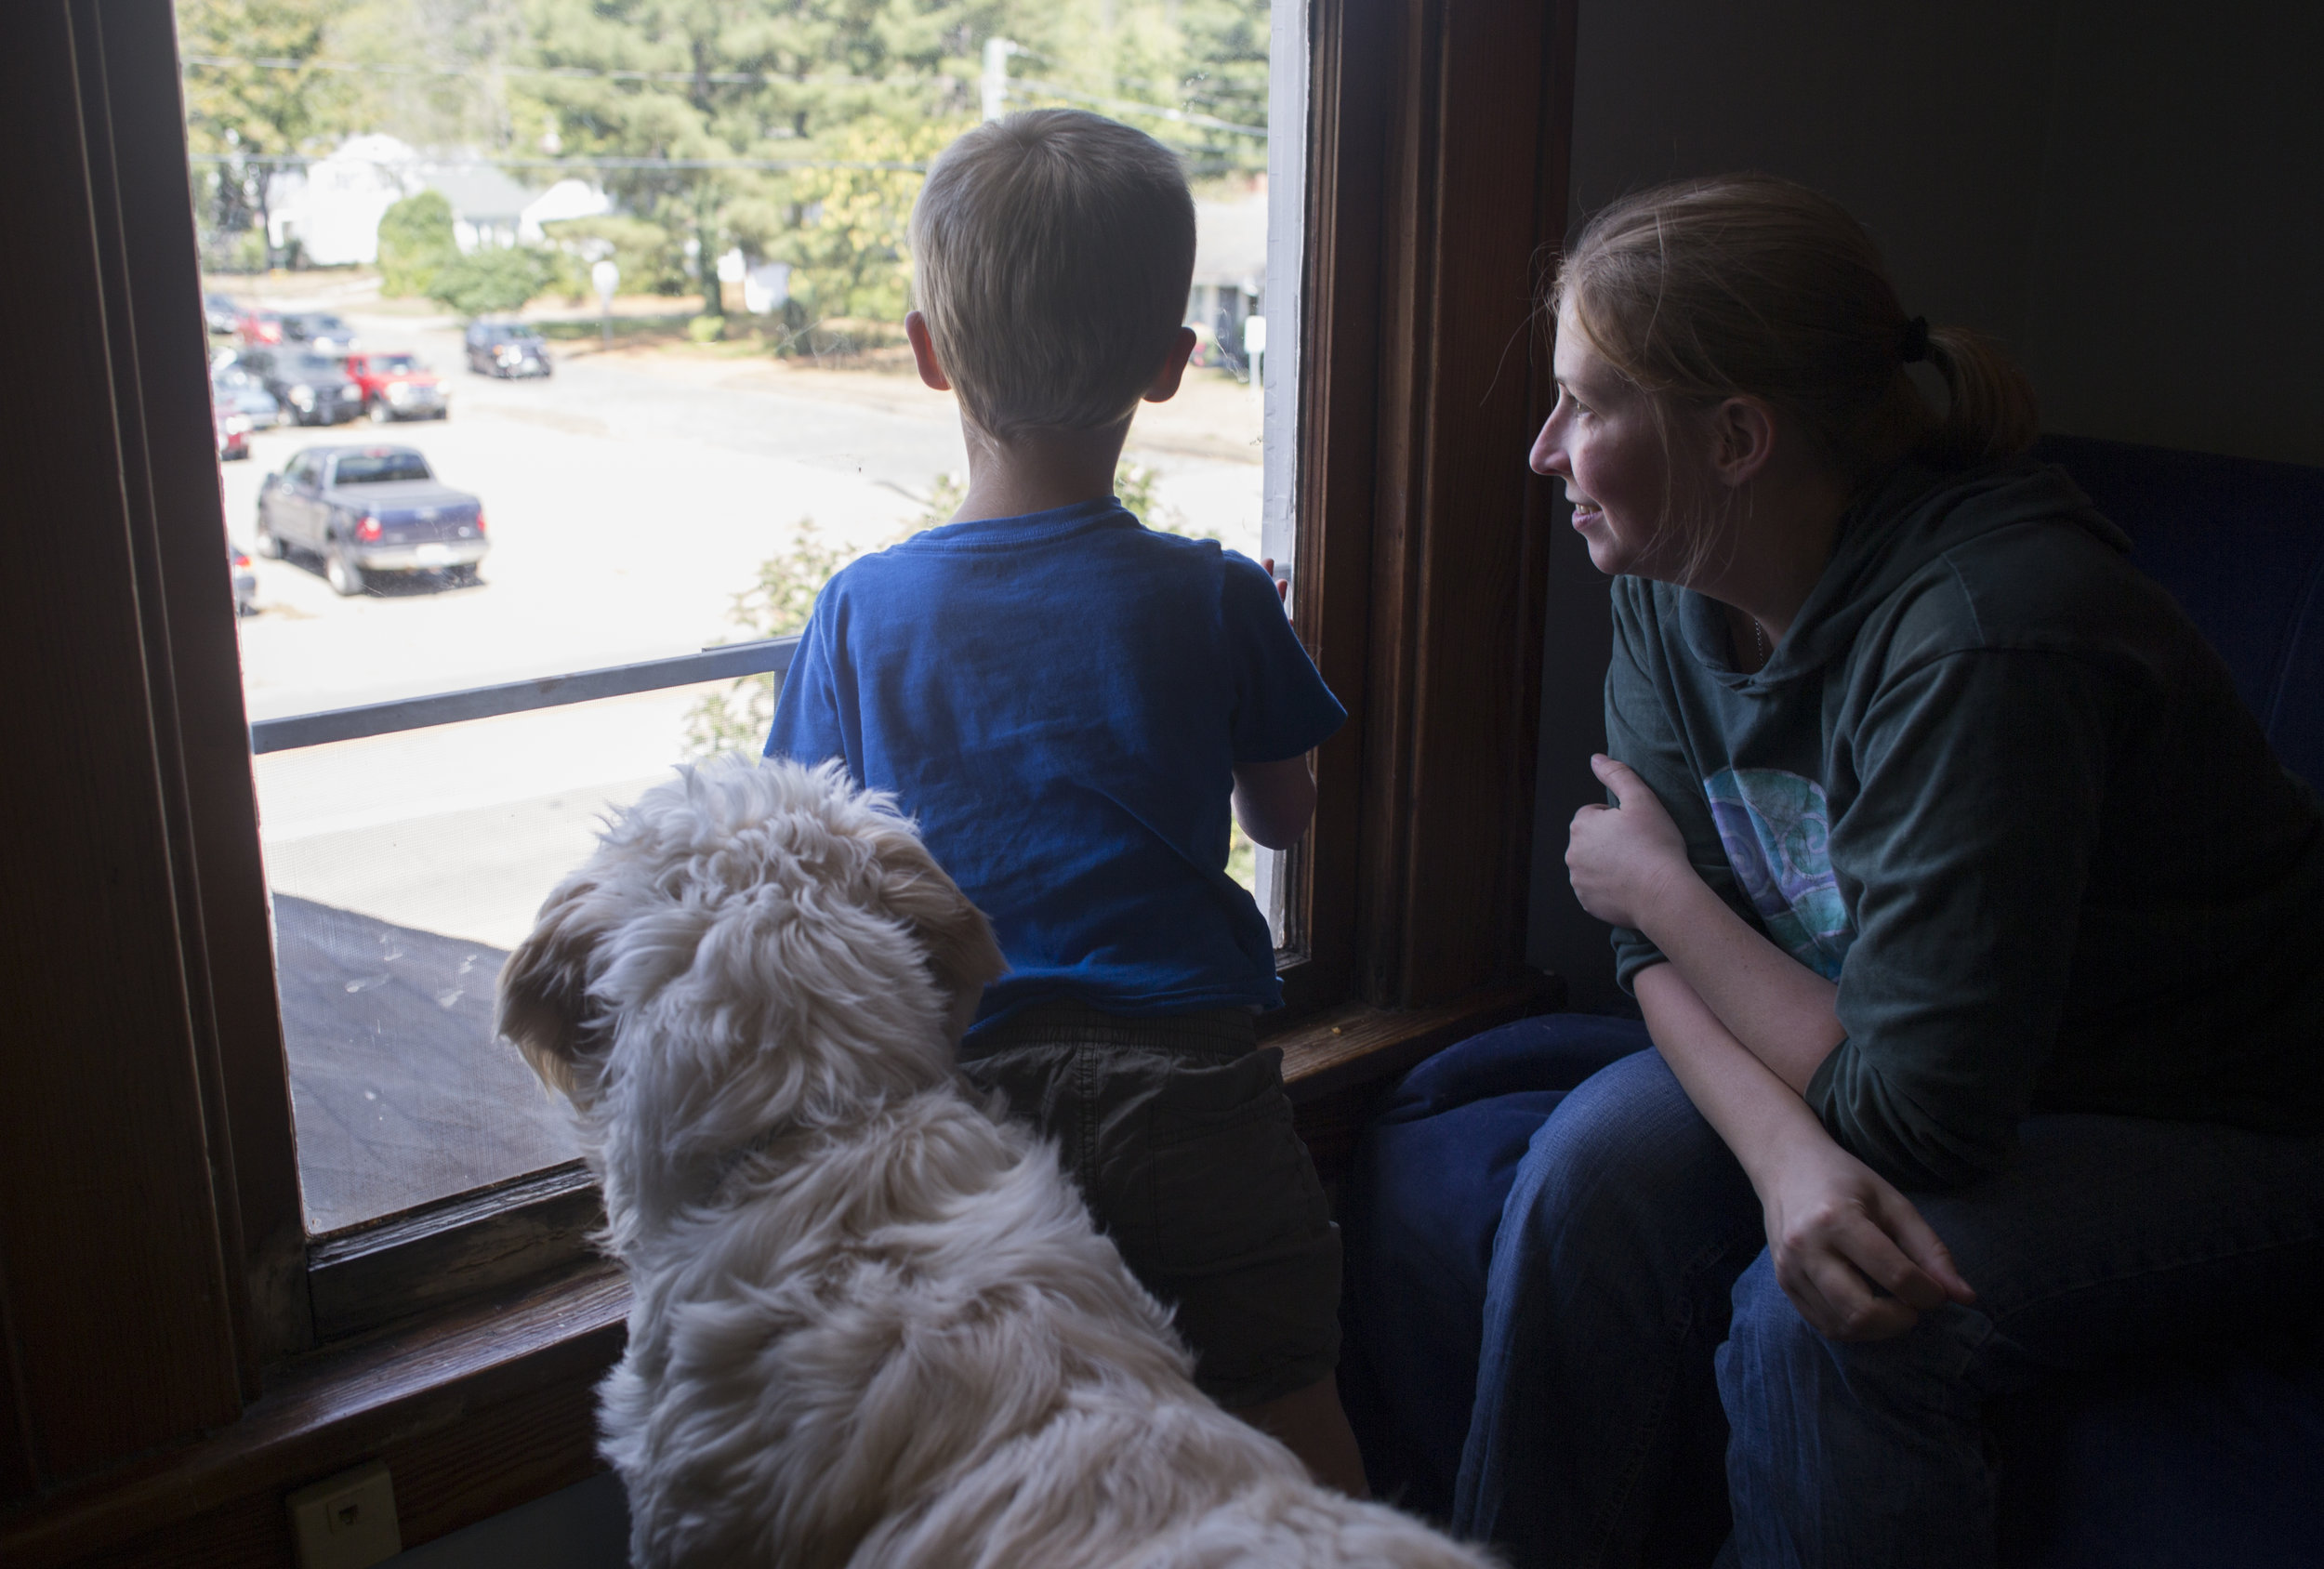  Spad, Josiah, and Rachel look out the playroom window in their home in Athens, Ohio. Rachel said she believes Josiah and Spad's relationship will strengthen with time and has hope that Spad will help Josiah get through every-day challenges. "It's no